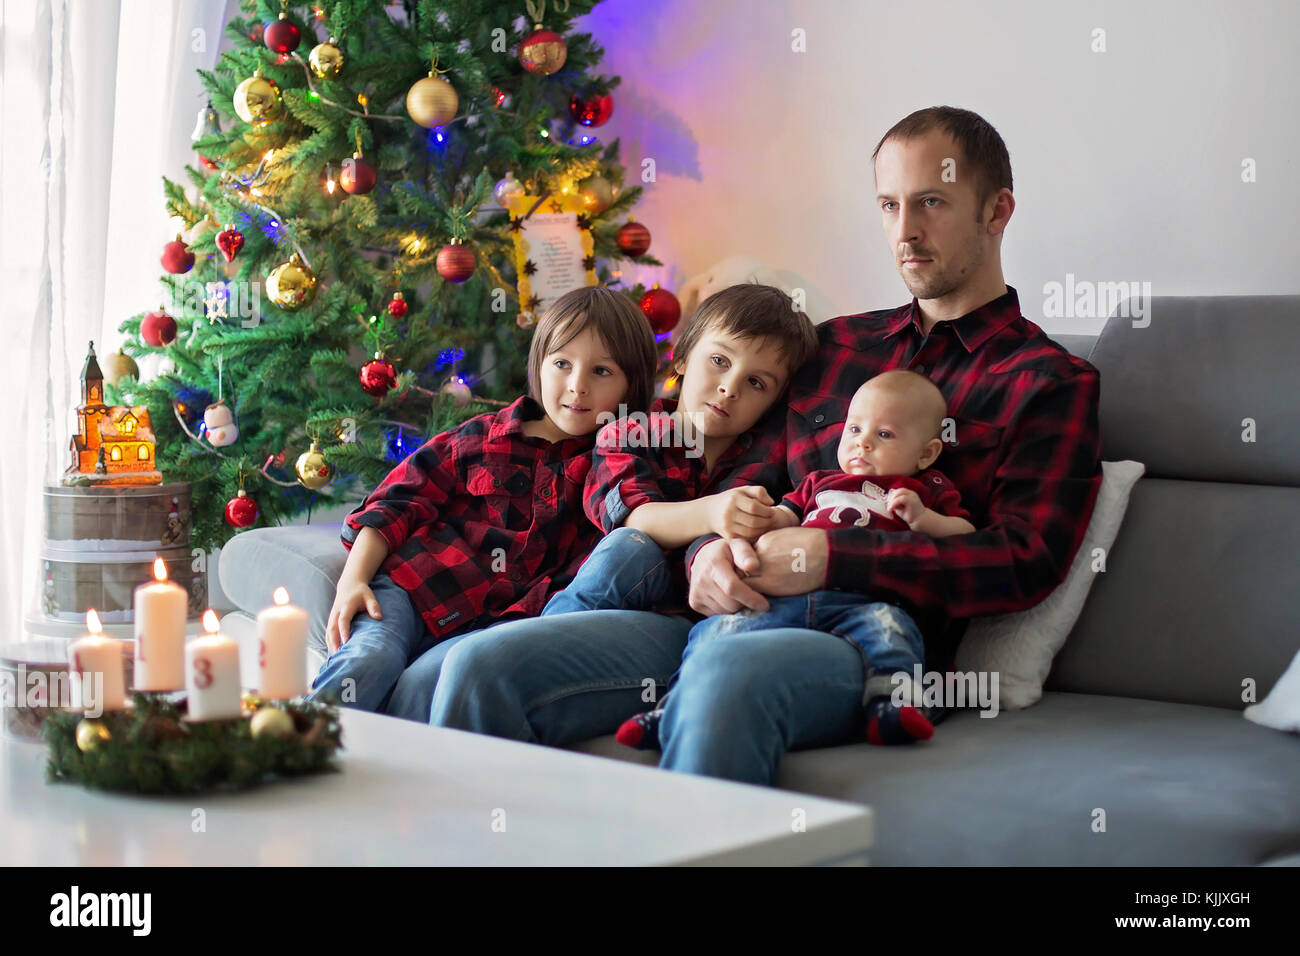 Happy family portrait on Christmas, mother, father and three children sitting on couch at home, chritmas decoration around them Stock Photo